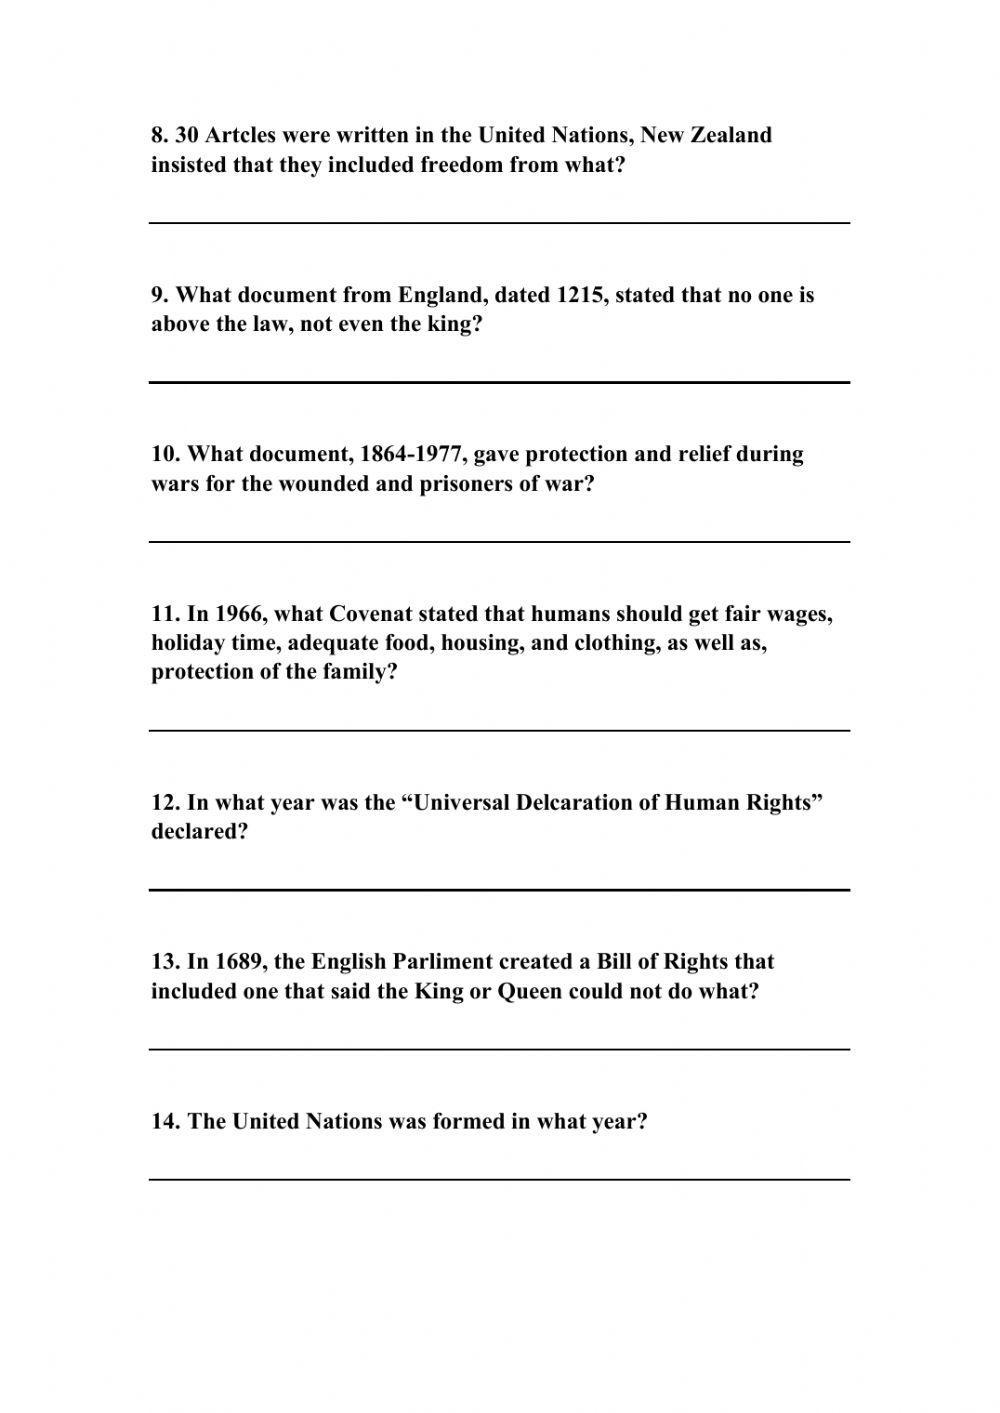 History of International Human Rights Test